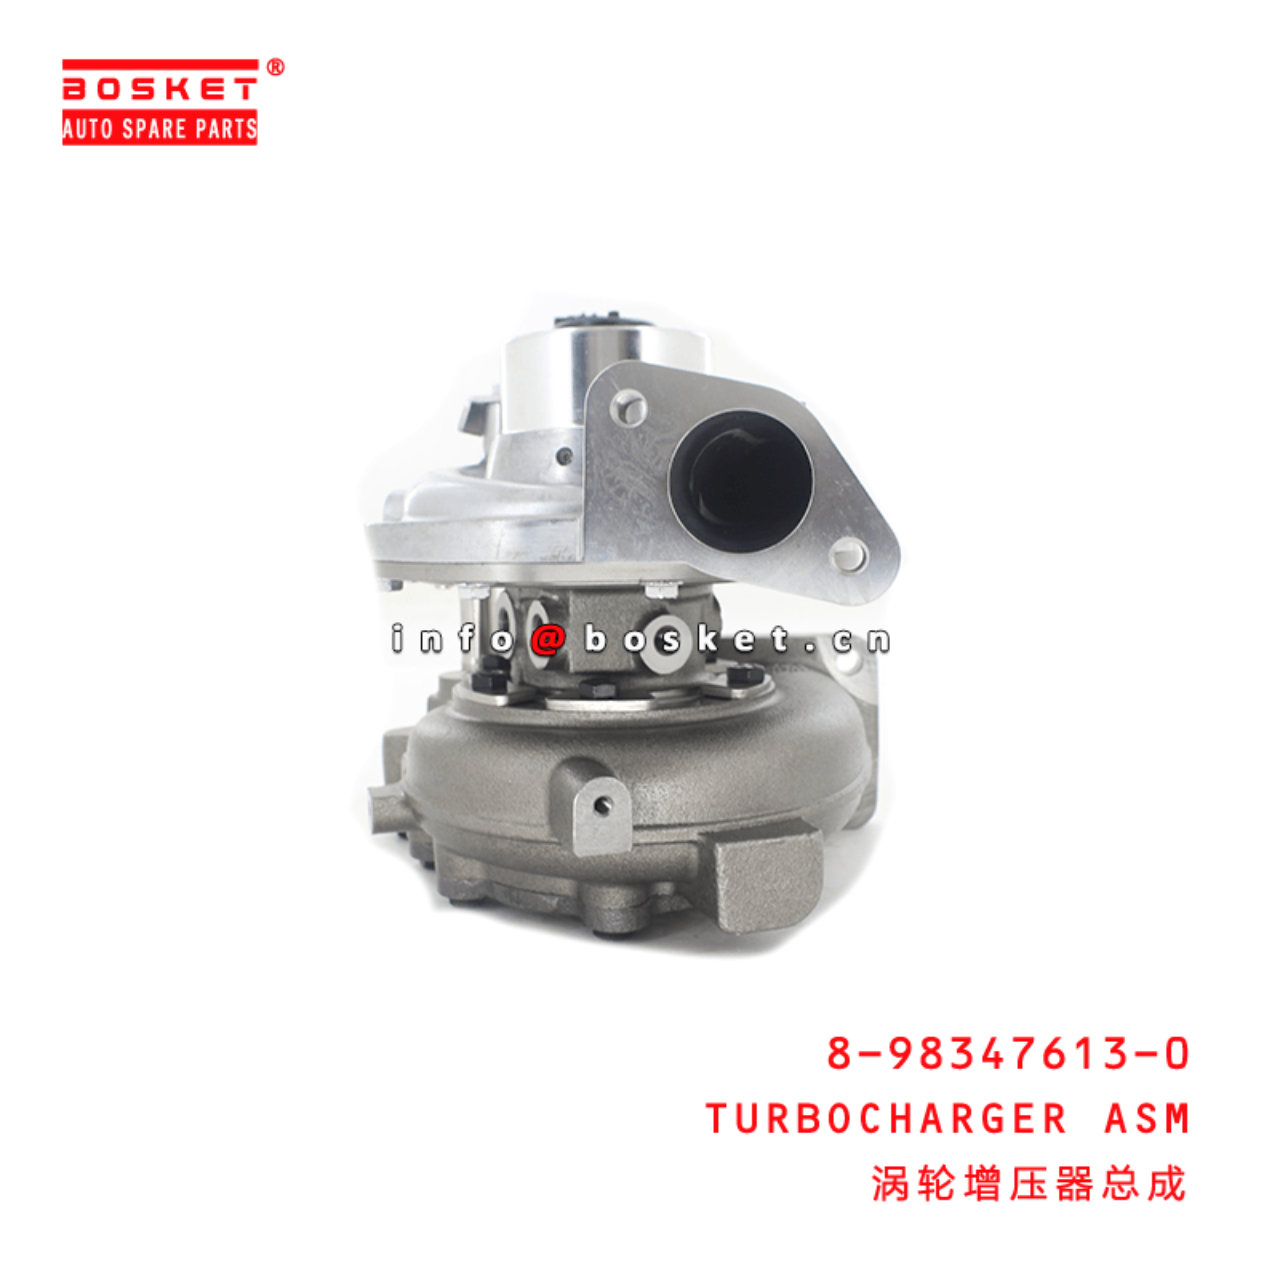  8-98347613-0 Turbocharger Assembly 8983476130 Suitable for ISUZU FRR